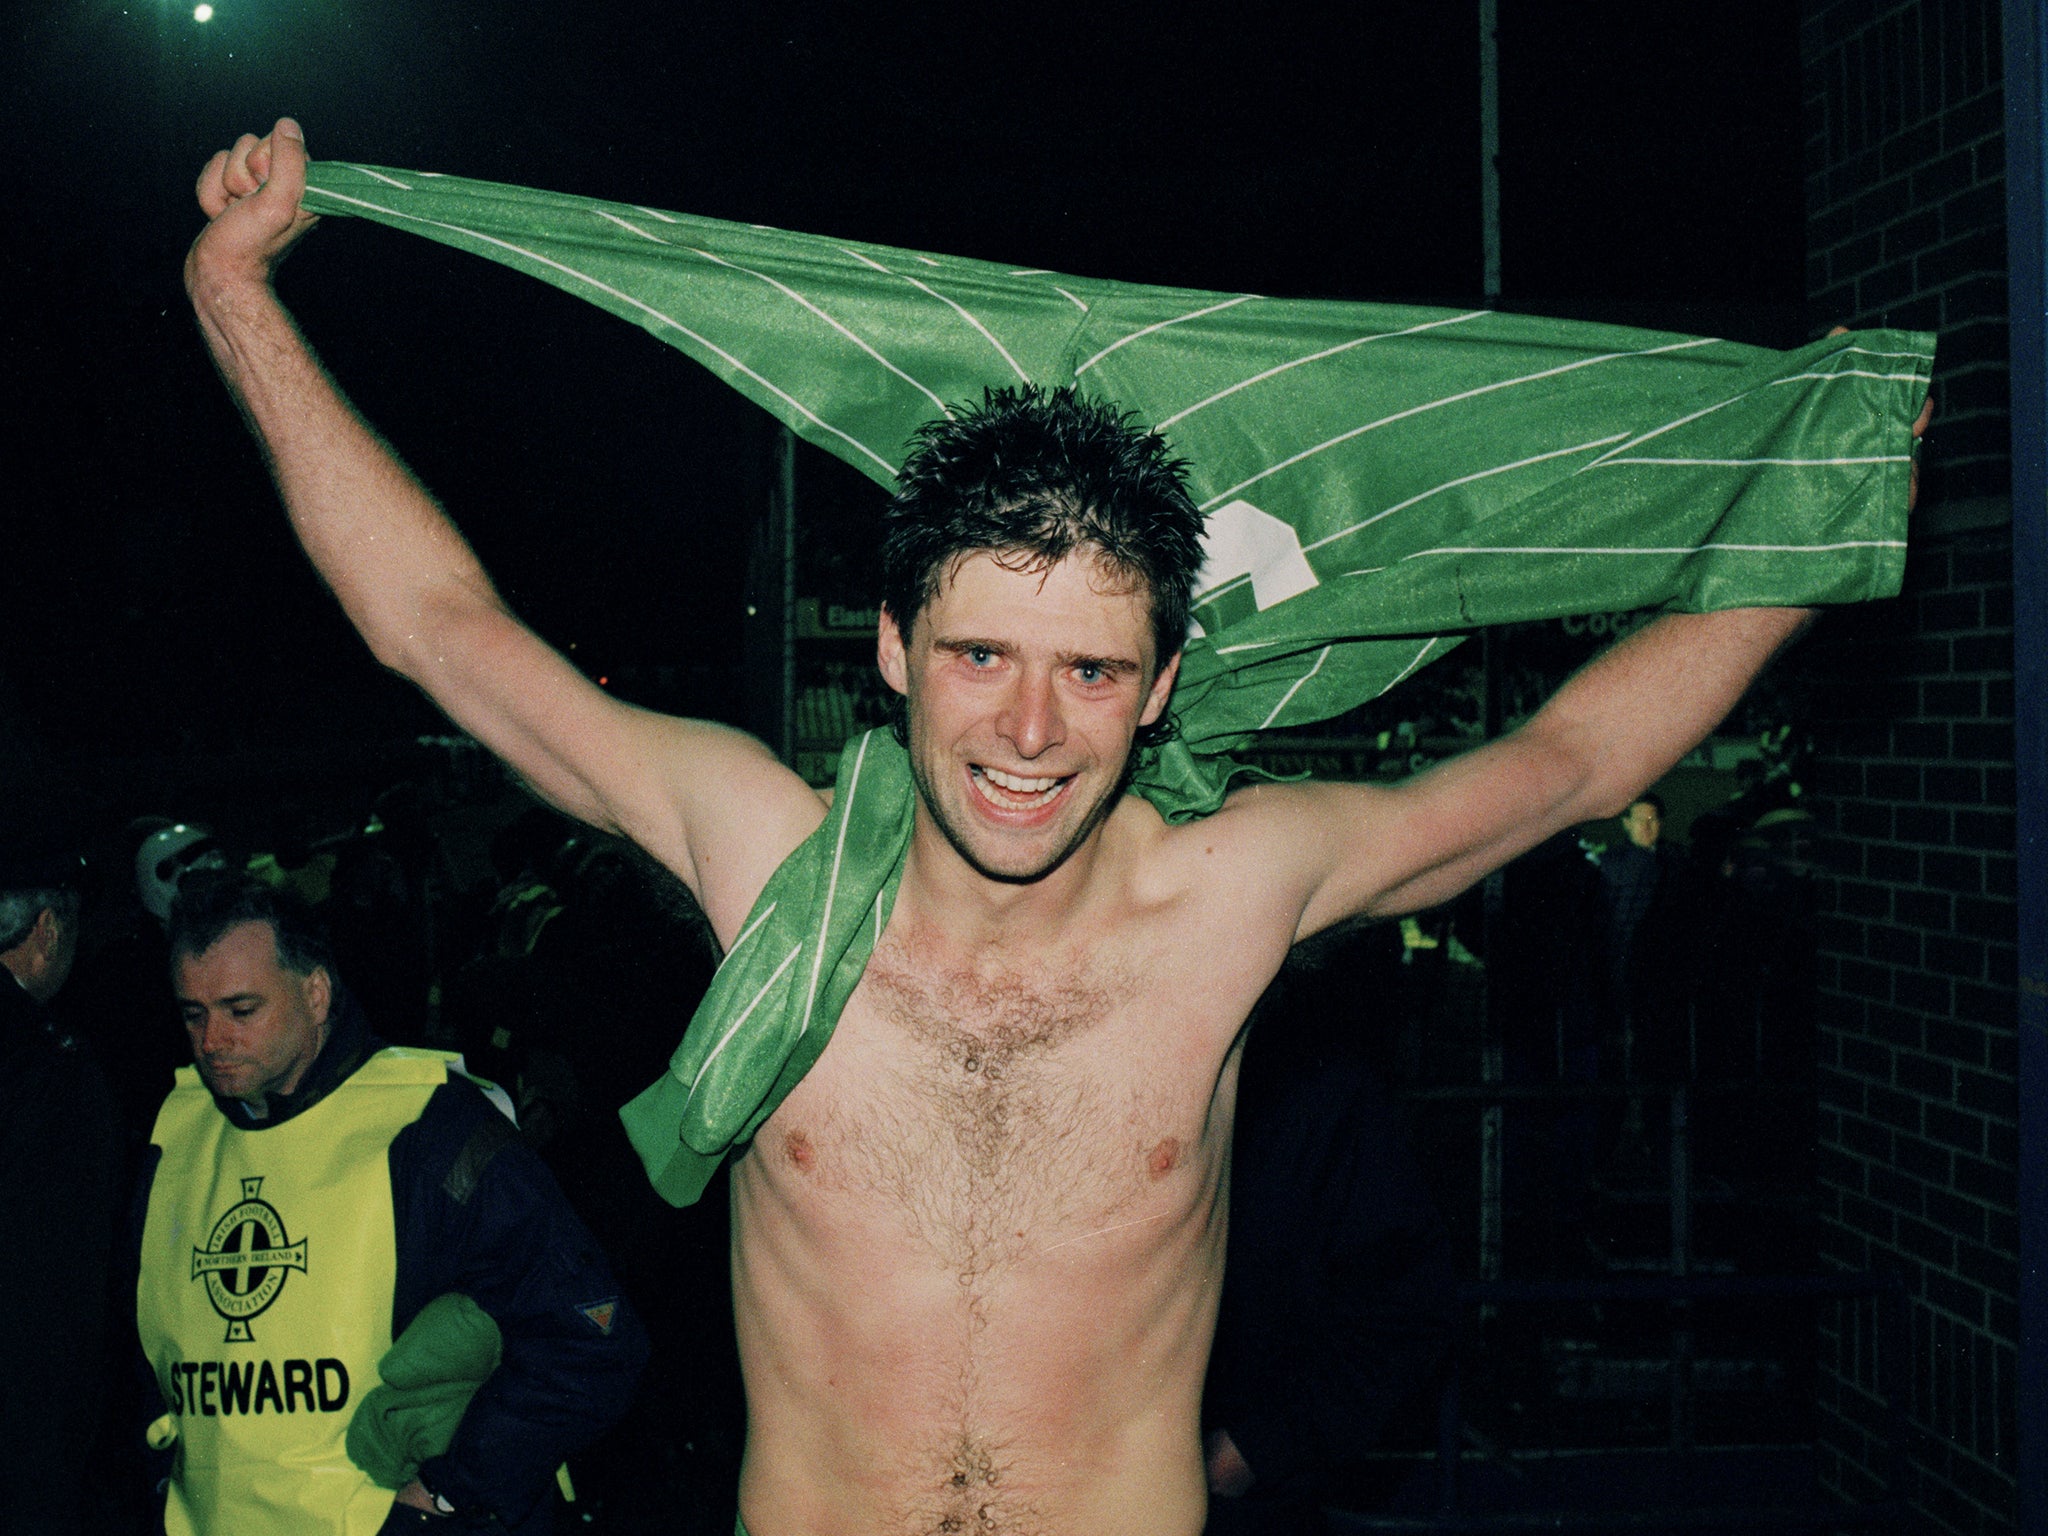  Republic of Ireland’s Niall Quinn celebrates their place in the 1994 World Cup finals